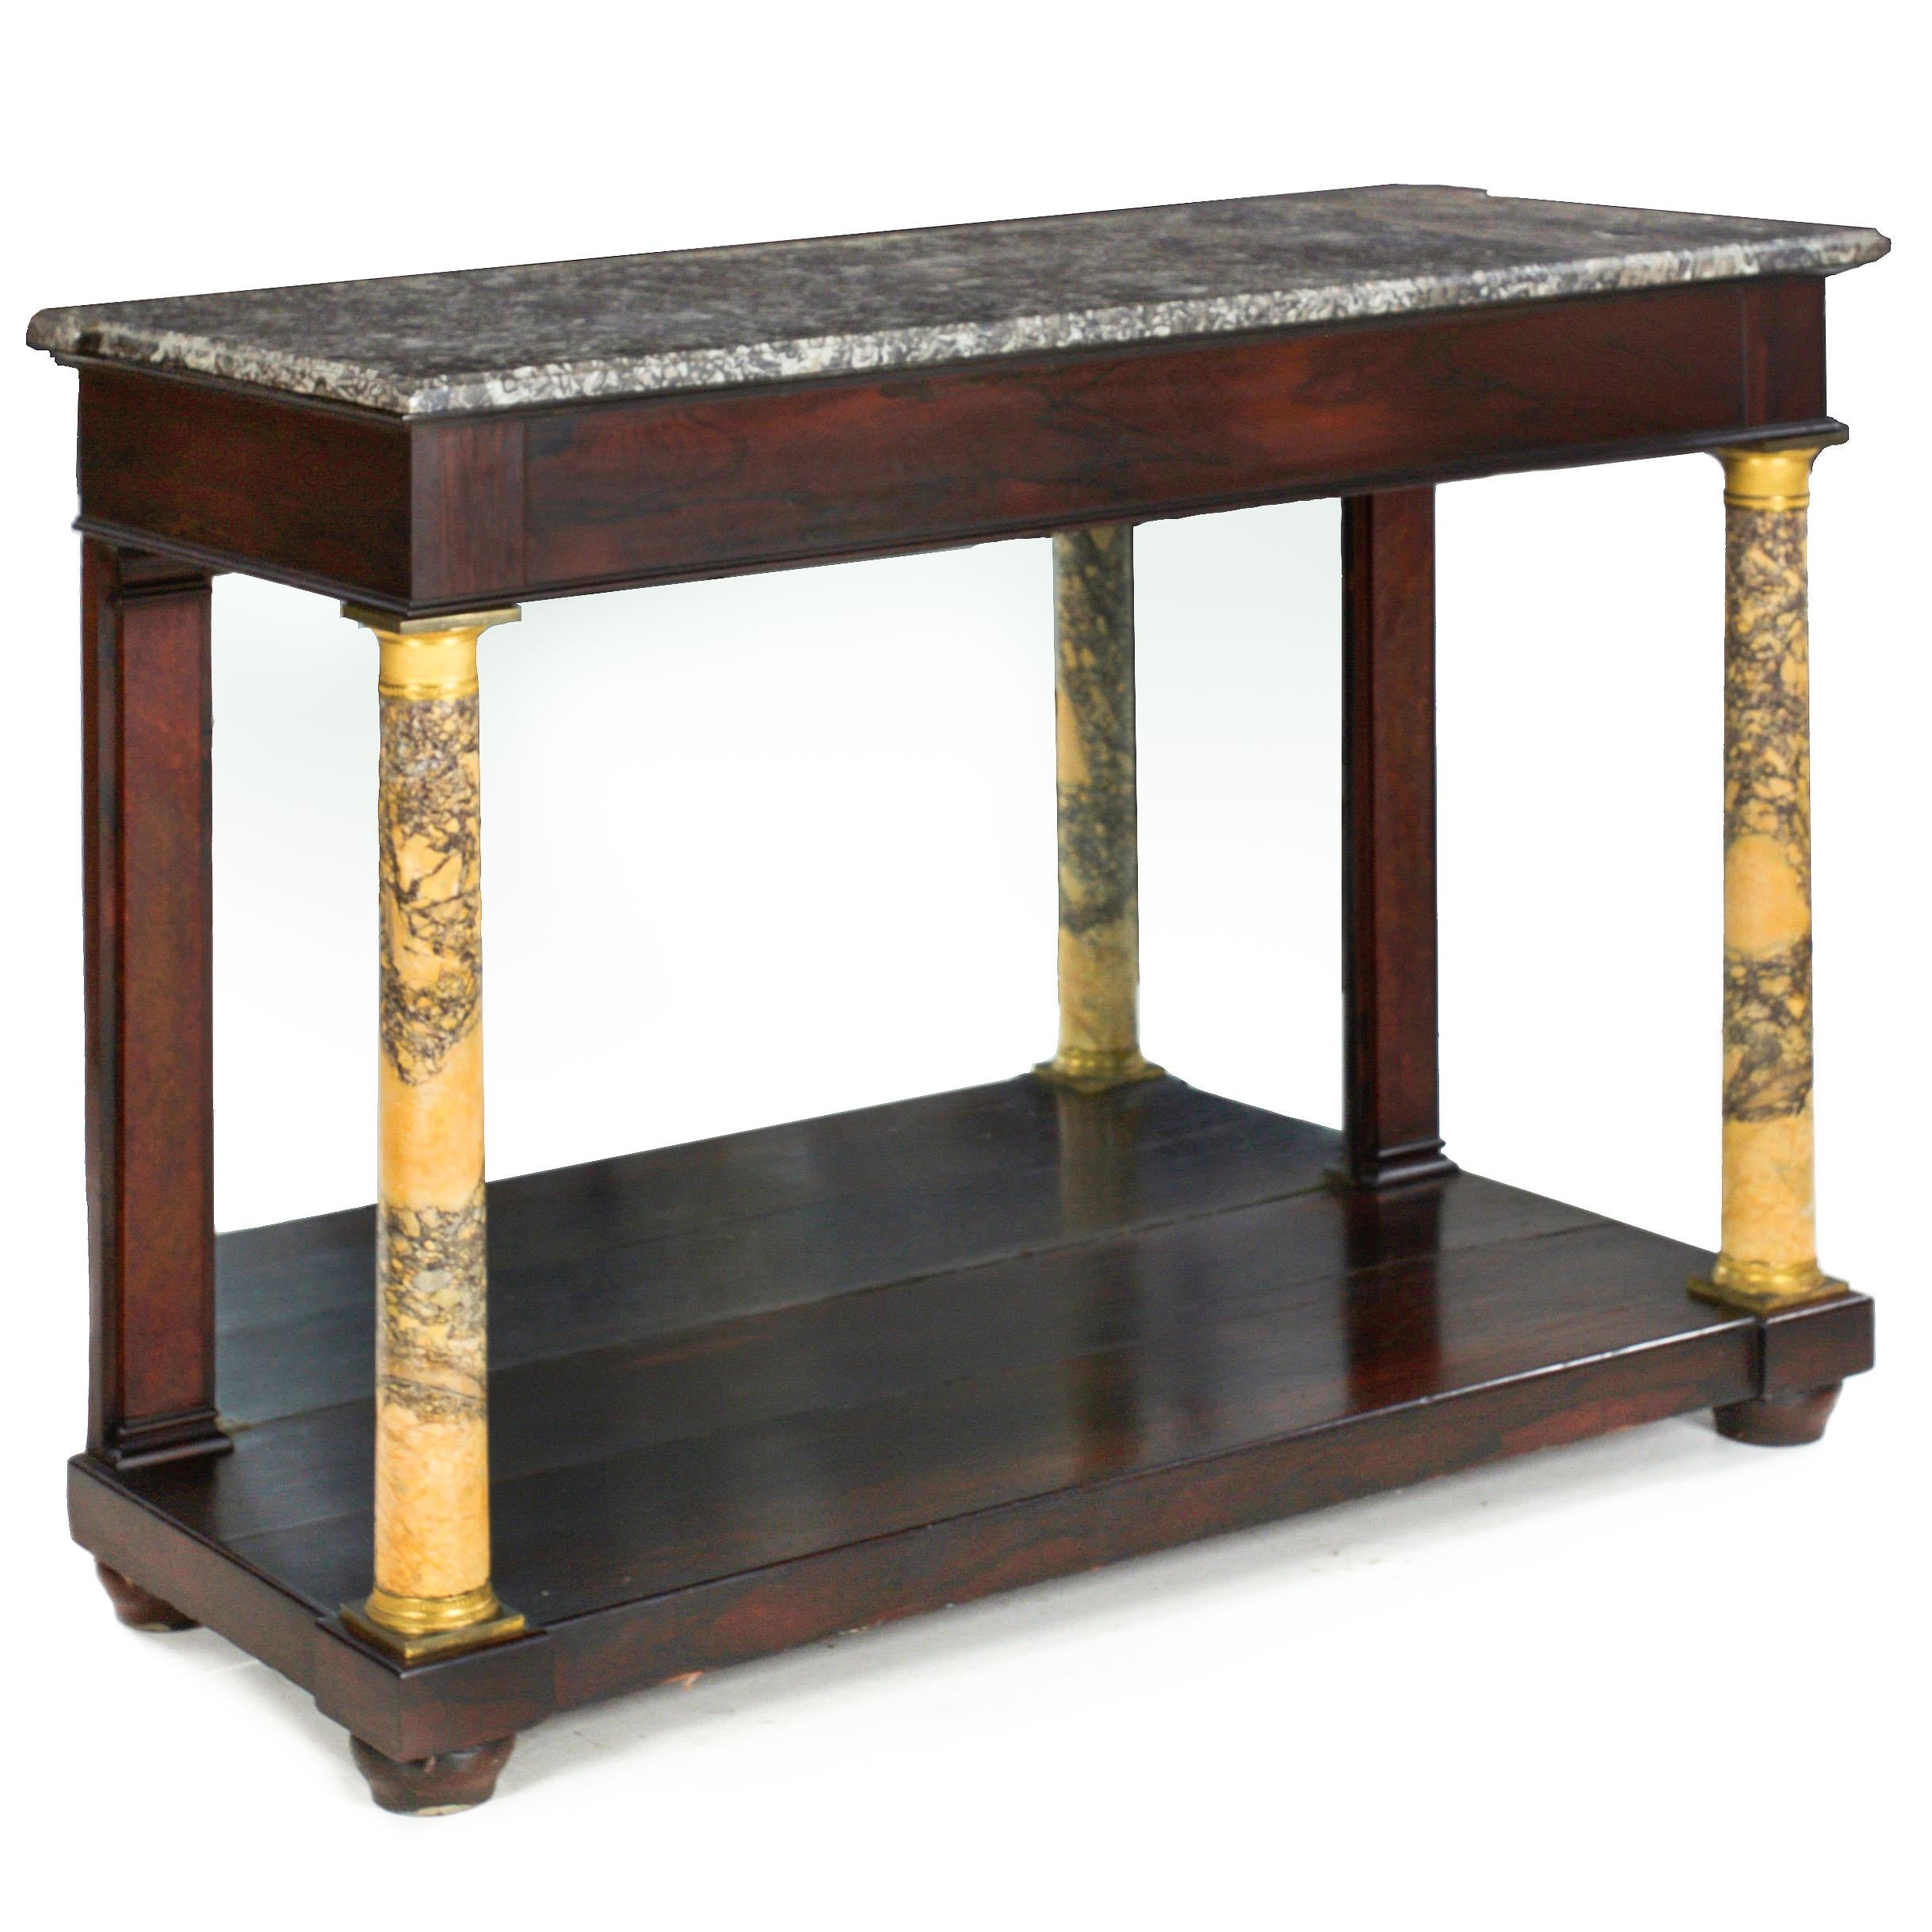 EMPIRE MAHOGANY PIER TABLE WITH MARBLE COLUMNS
Continental, circa mid-19th century
Item # 109OYP14M 

A good 19th century pier table with a gray marble top situated over a squared apron with flamed mahogany veneers raised over sienna marble columns